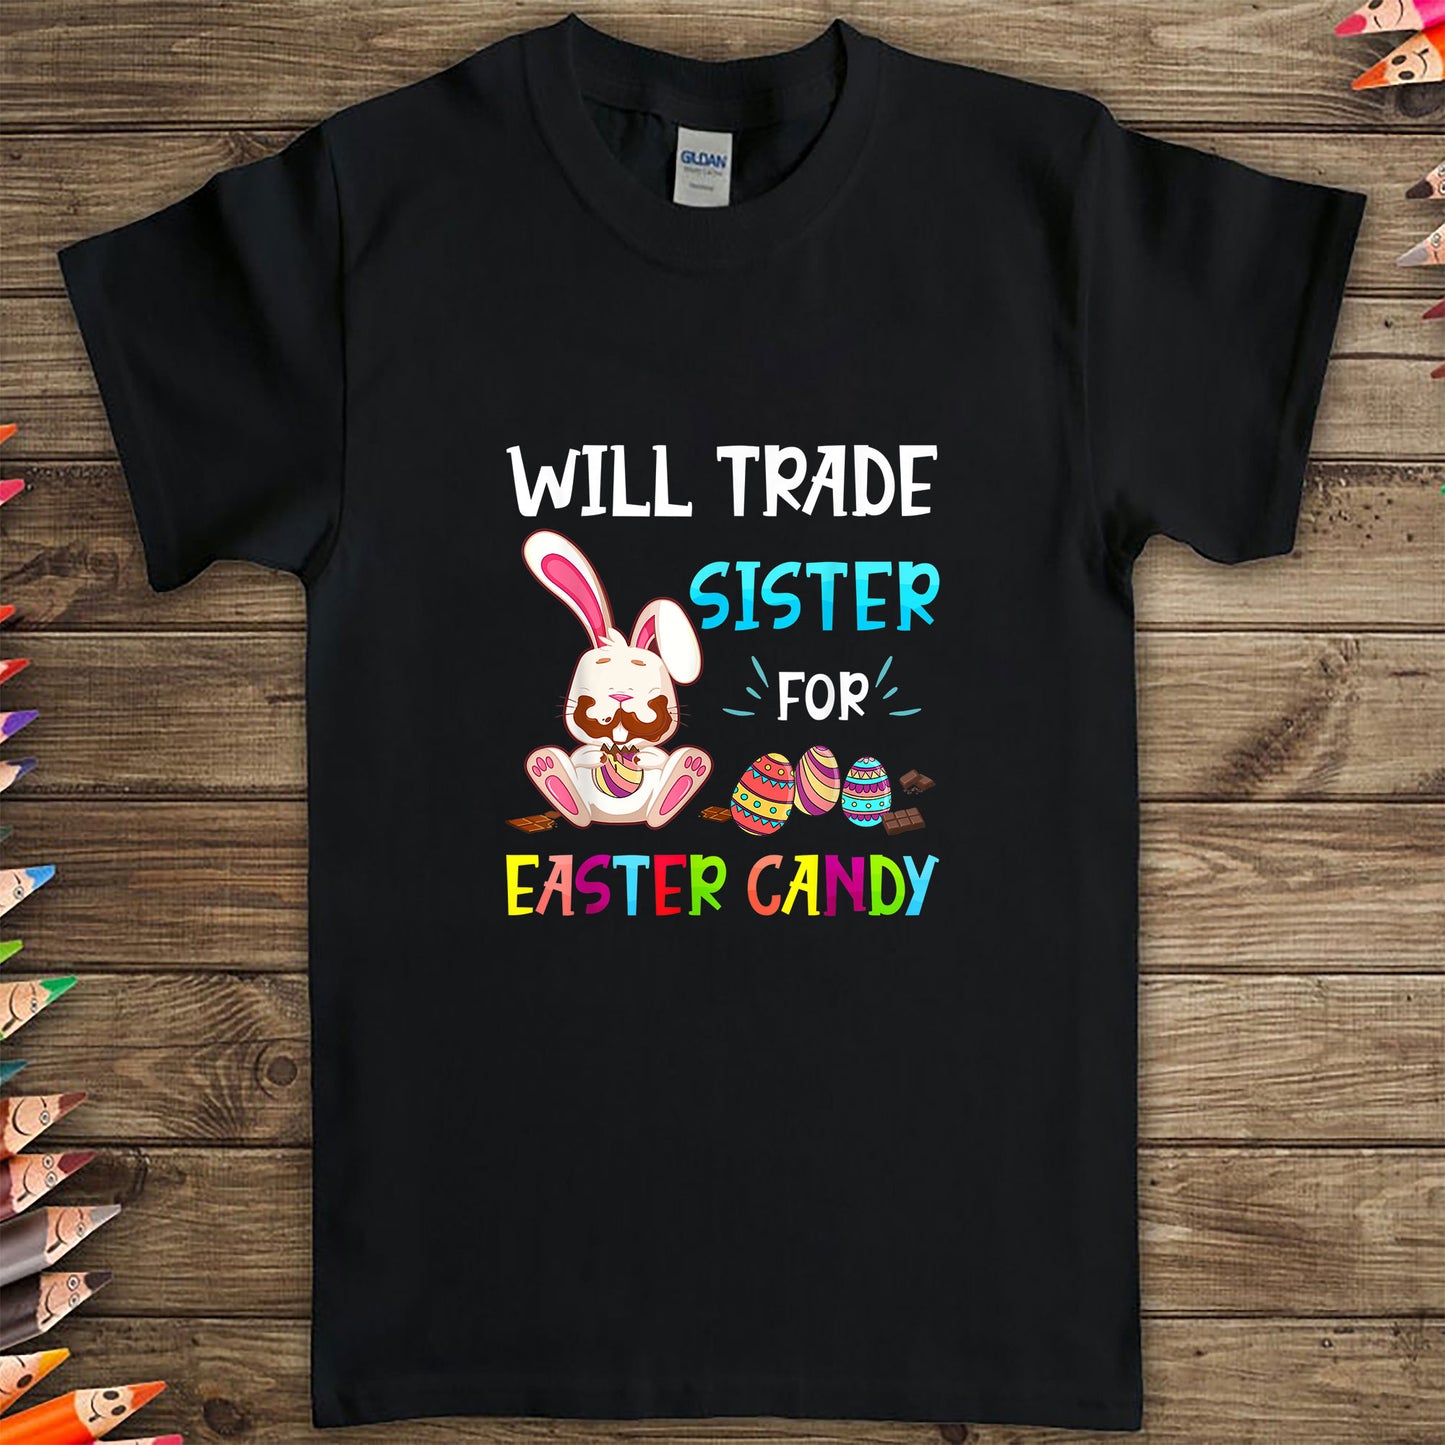 I Will Trade Sister For Easter Candy Shirt, Funny Easter Shirt, Toddler Boy Easter Shirt, Easter Gifts For Kids, Easter Gifts For Toddlers